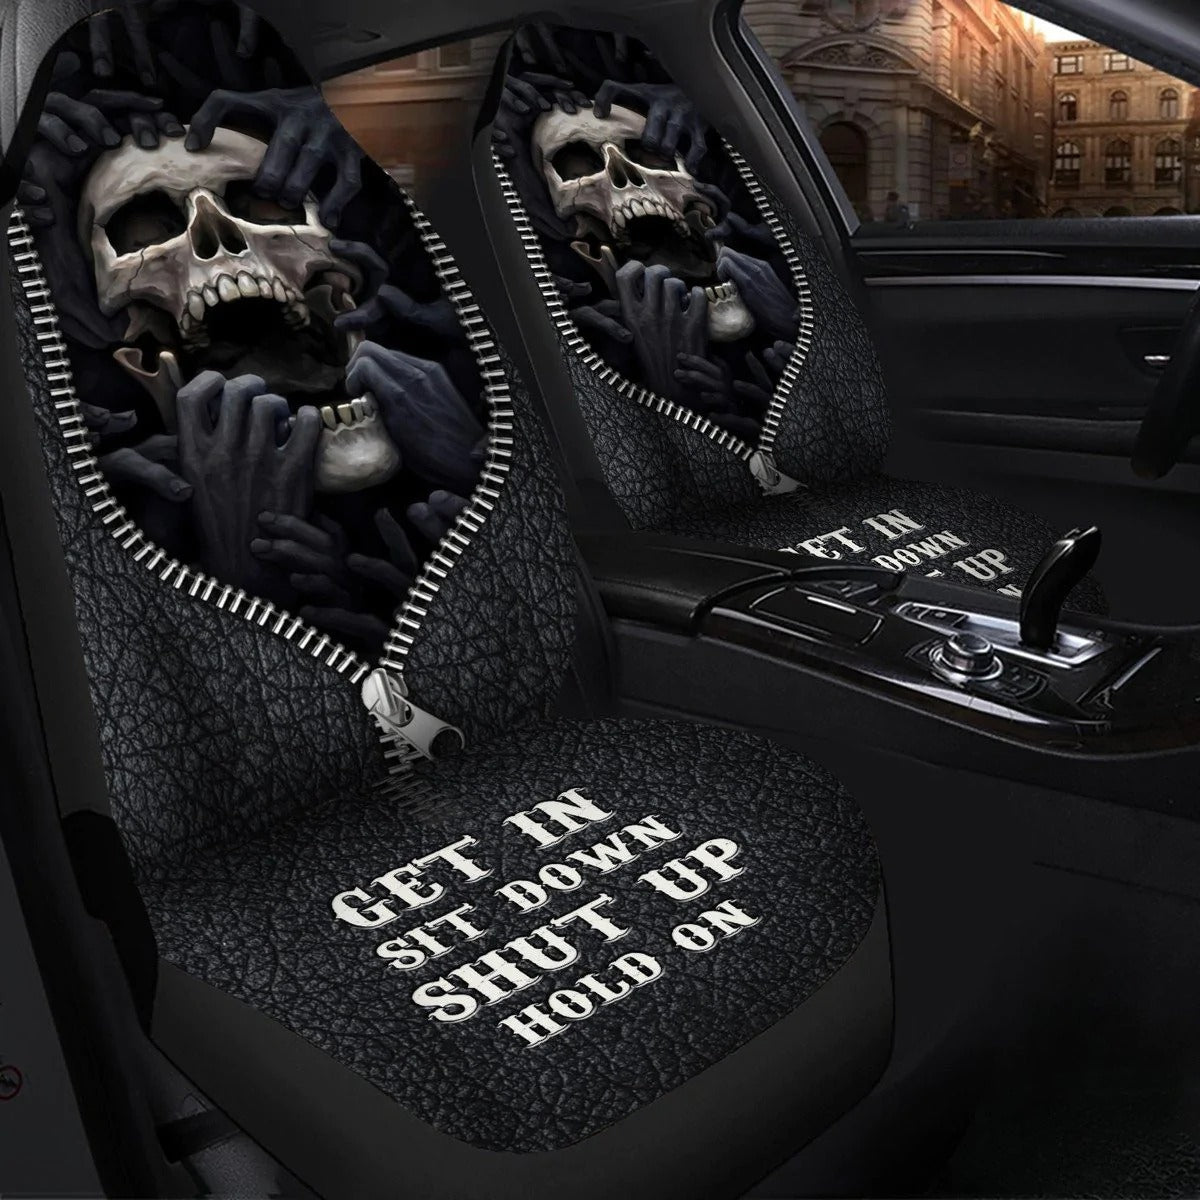 Skull Darkness Hold on Car Seat Covers/ 3D Print Skull On Front Auto Seat Covers